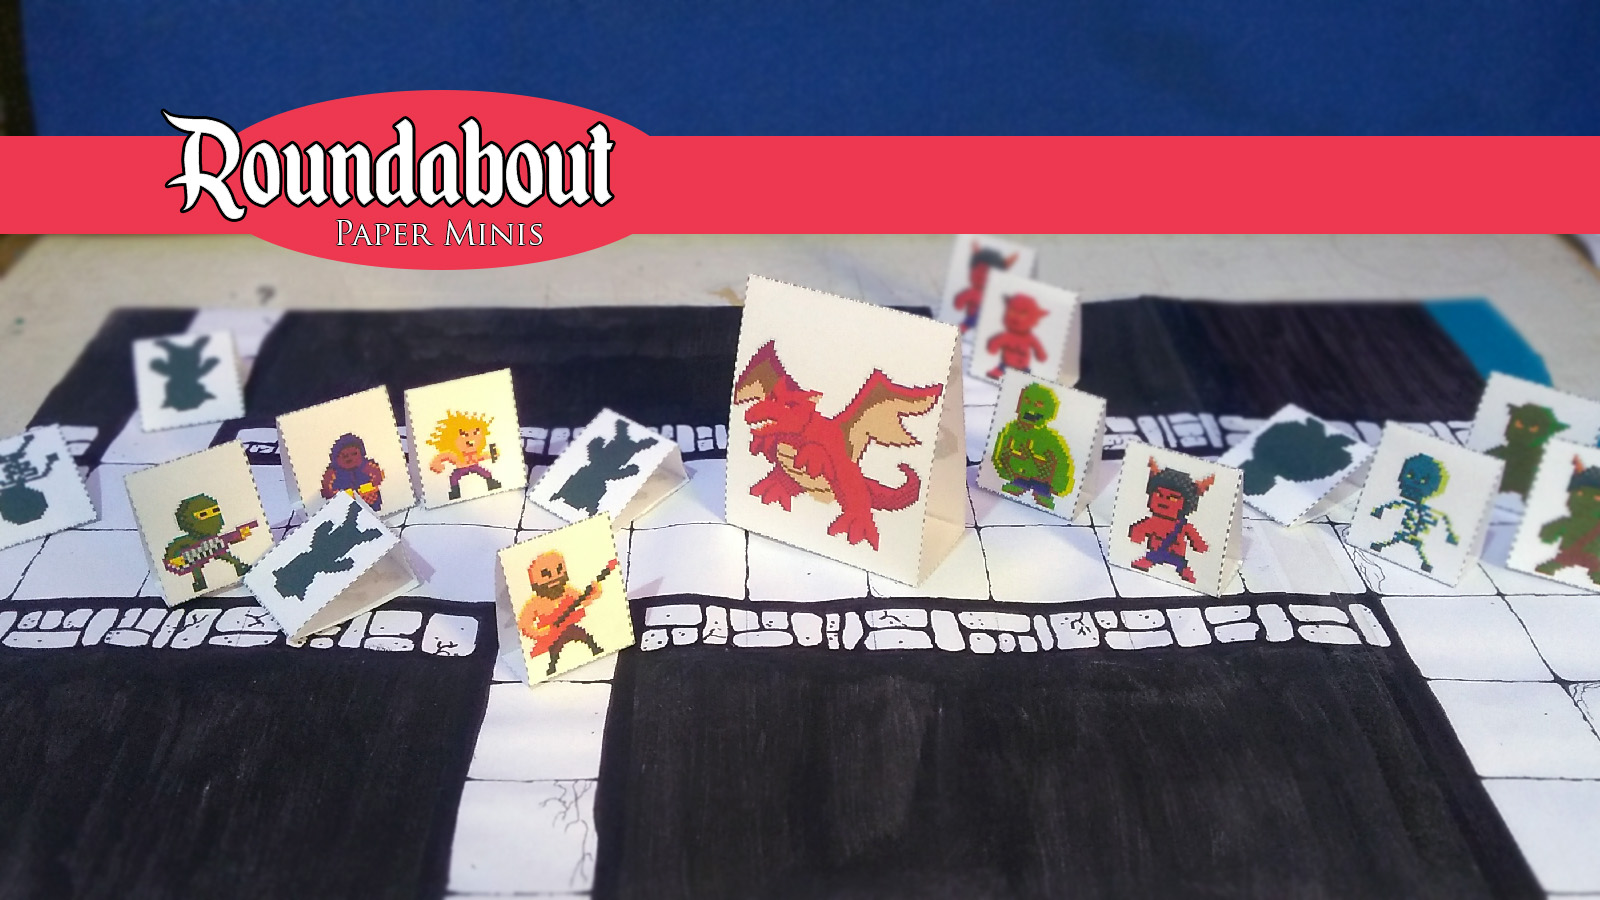 Roundabout Paper Minis